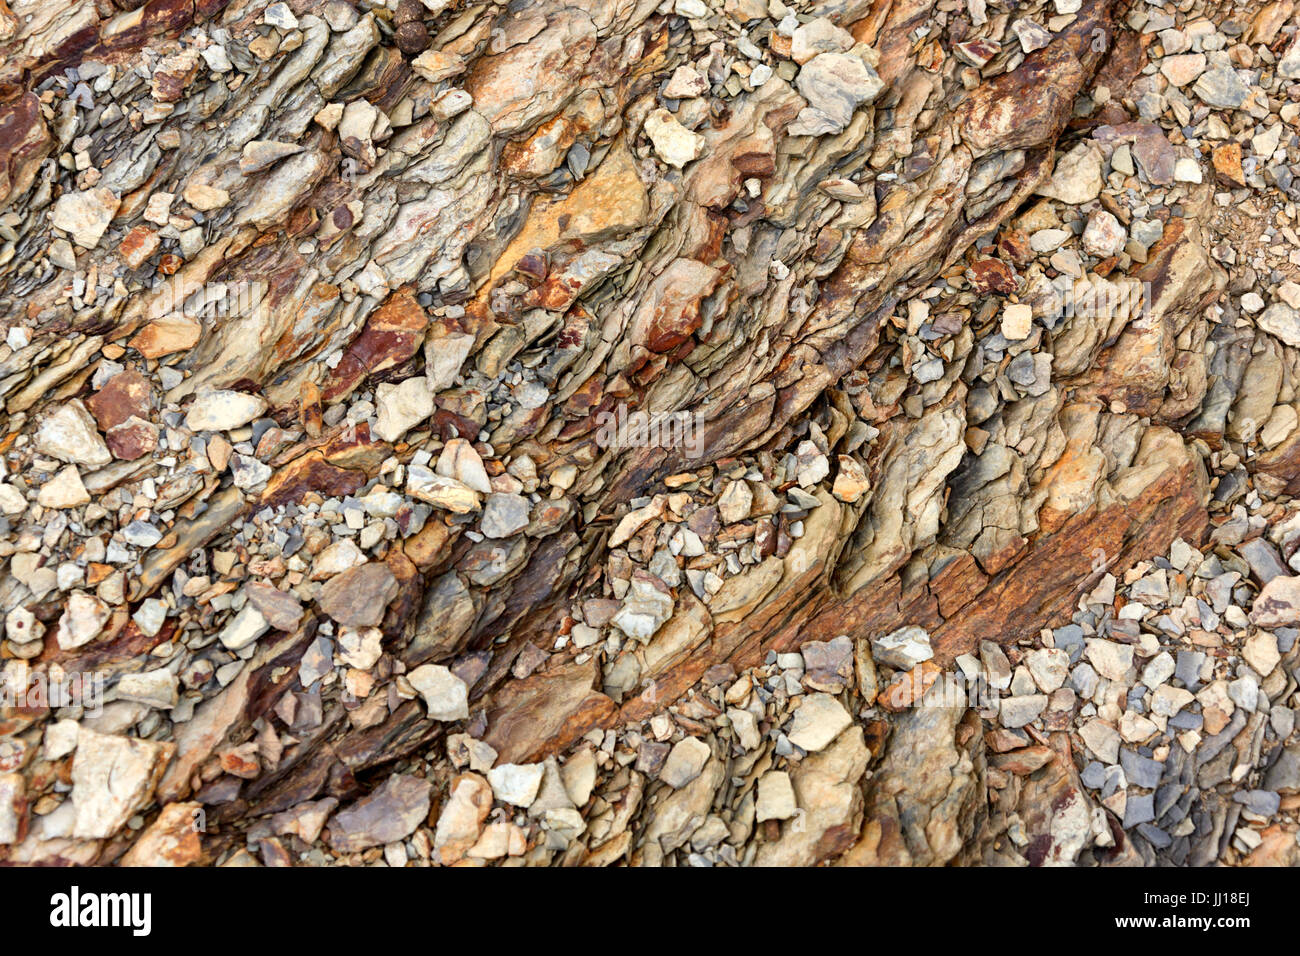 Background texture image of stones and rocks. Stock Photo